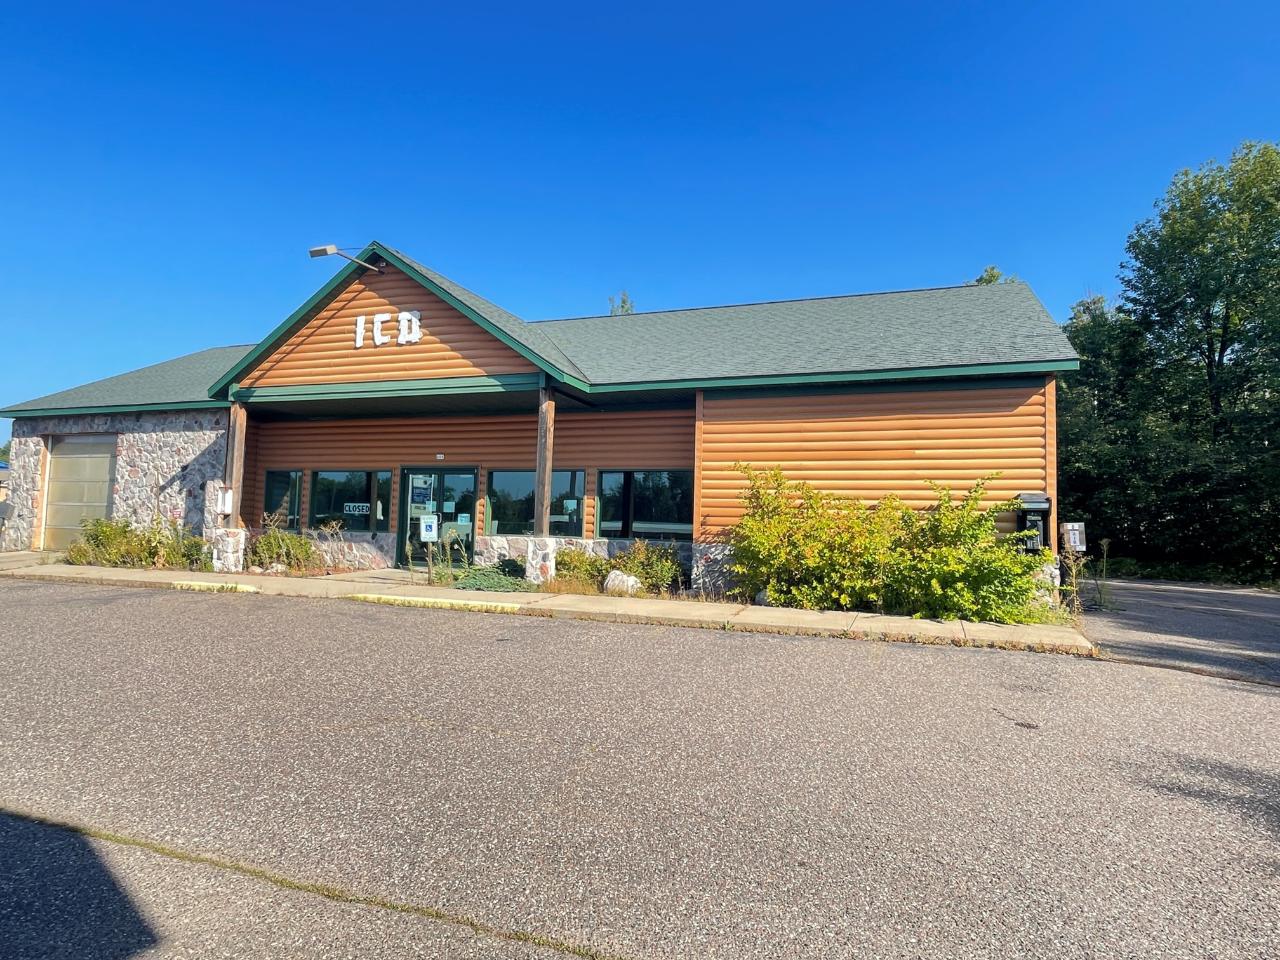 Located on the main entrance to the city of Rhinelander with great visibility. Your business could be here! The parcel has 200 feet of road frontage with a traffic count of 10,500 per day. This commercial space, zoned B-3, has approximately 3200 square feet of building space and could be used for multiple uses. Prior use as a convenience store with large and open front room, 36 x 8 walk-in cooler, office area, fish bait station, and single carwash bay. Buyer to verify square footage and zoning. Buyer to verify square footage and zoning.